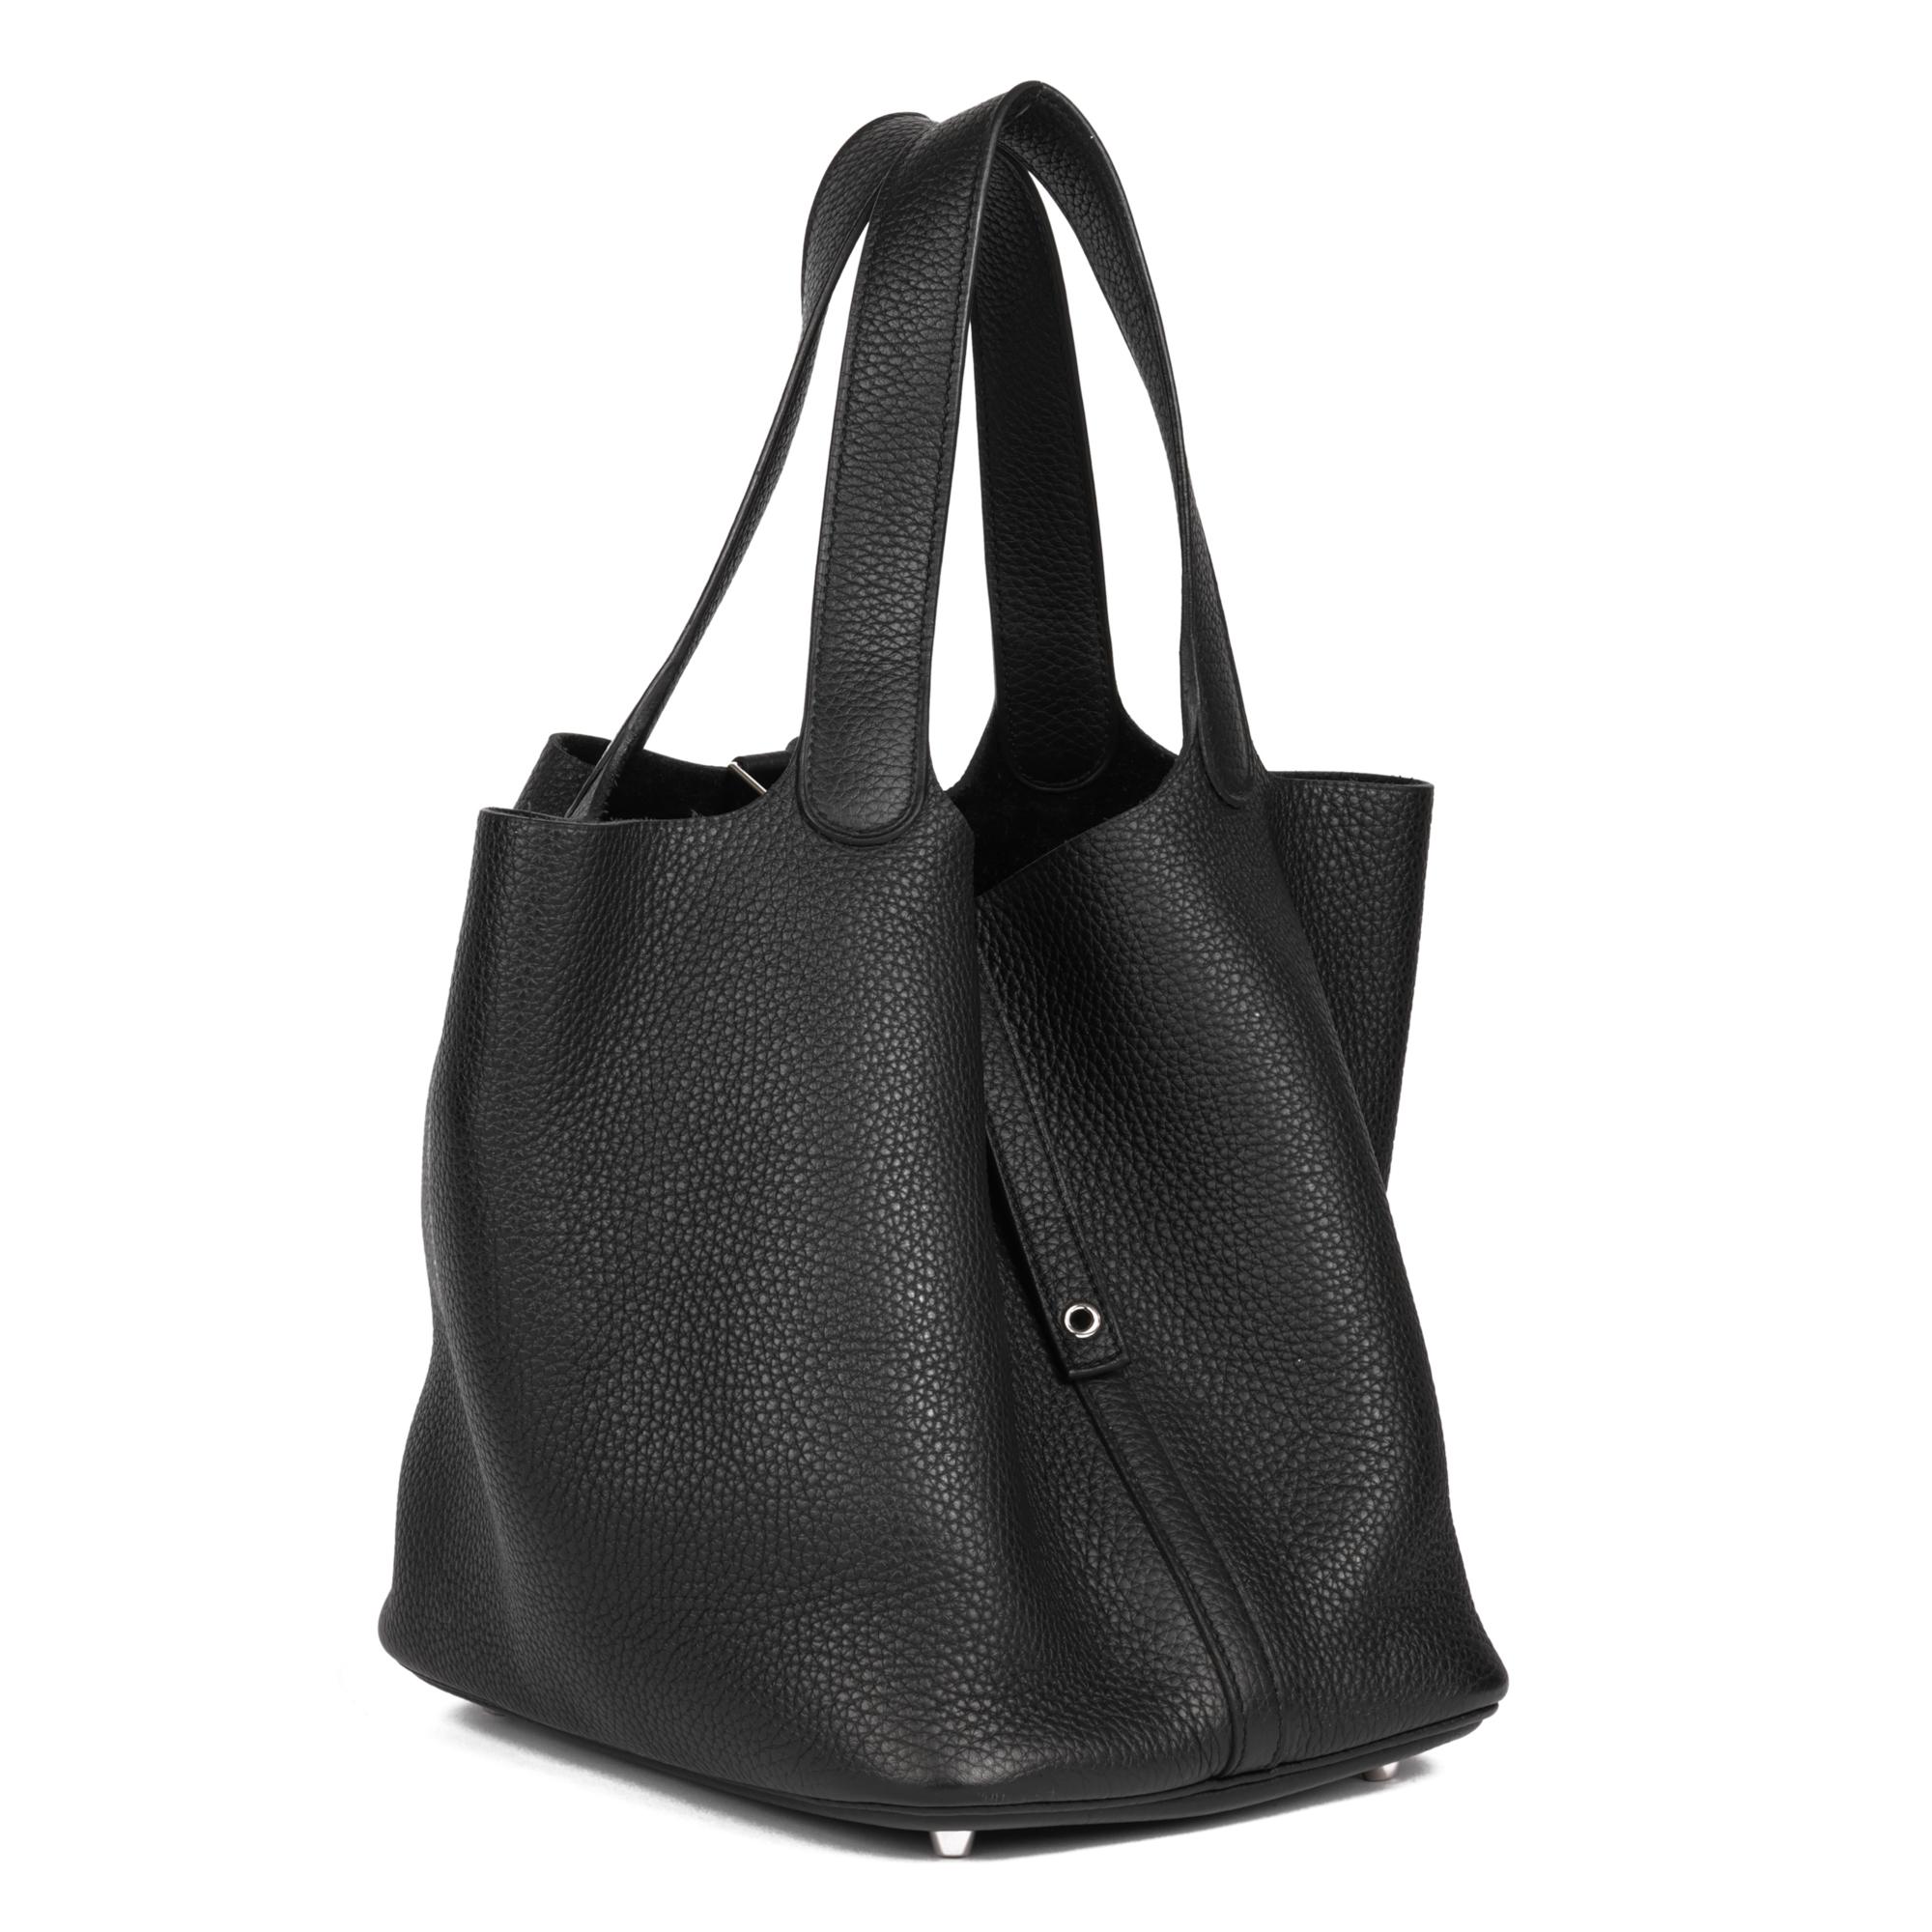 HERMES
Black Togo Leather Picotin 22

Xupes Reference: HB5092
Serial Number: Z
Age (Circa): 2021
Accompanied By: Hermès Dust Bag, Box, Padlock, Keys, Clochette, Care Booklet
Gender: Ladies
Type: Tote

Colour: Black 
Hardware: Silver
Material(s):